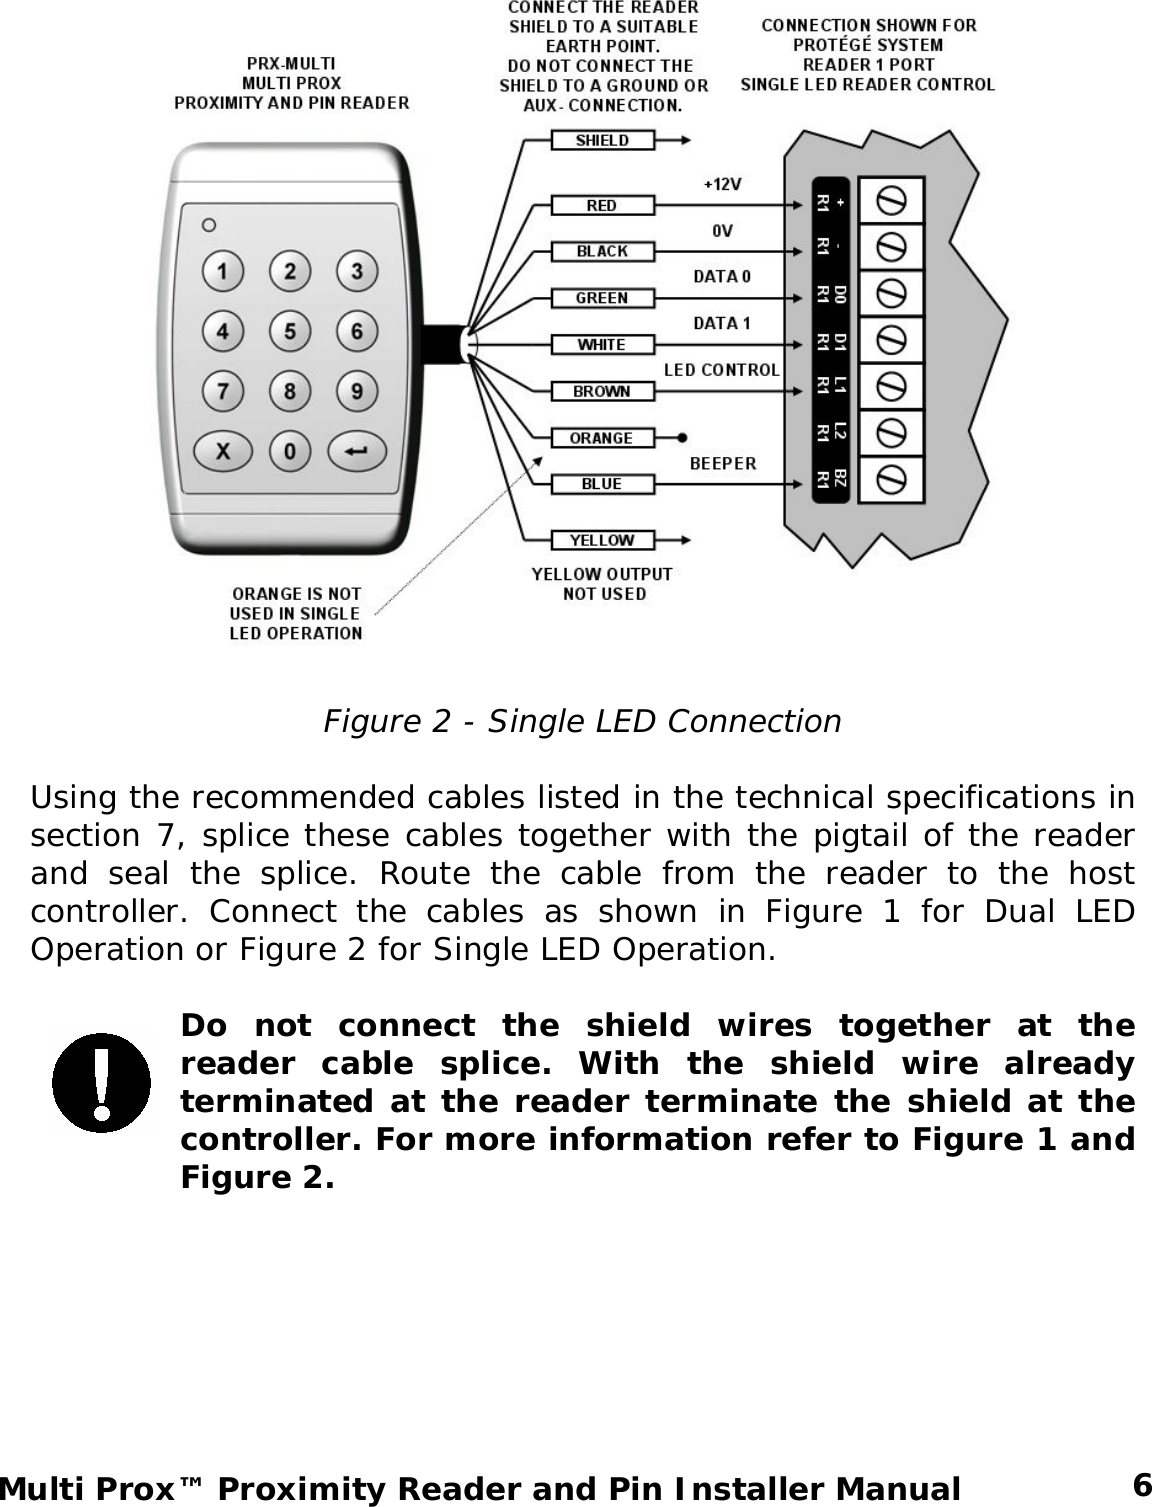   Figure 2 - Single LED Connection  Using the recommended cables listed in the technical specifications in section 7, splice these cables together with the pigtail of the reader and seal the splice. Route the cable from the reader to the host controller. Connect the cables as shown in Figure 1 for Dual LED Operation or Figure 2 for Single LED Operation.  Do not connect the shield wires together at the reader cable splice. With the shield wire already terminated at the reader terminate the shield at the controller. For more information refer to Figure 1 and Figure 2.     6 Multi Prox™ Proximity Reader and Pin Installer Manual 